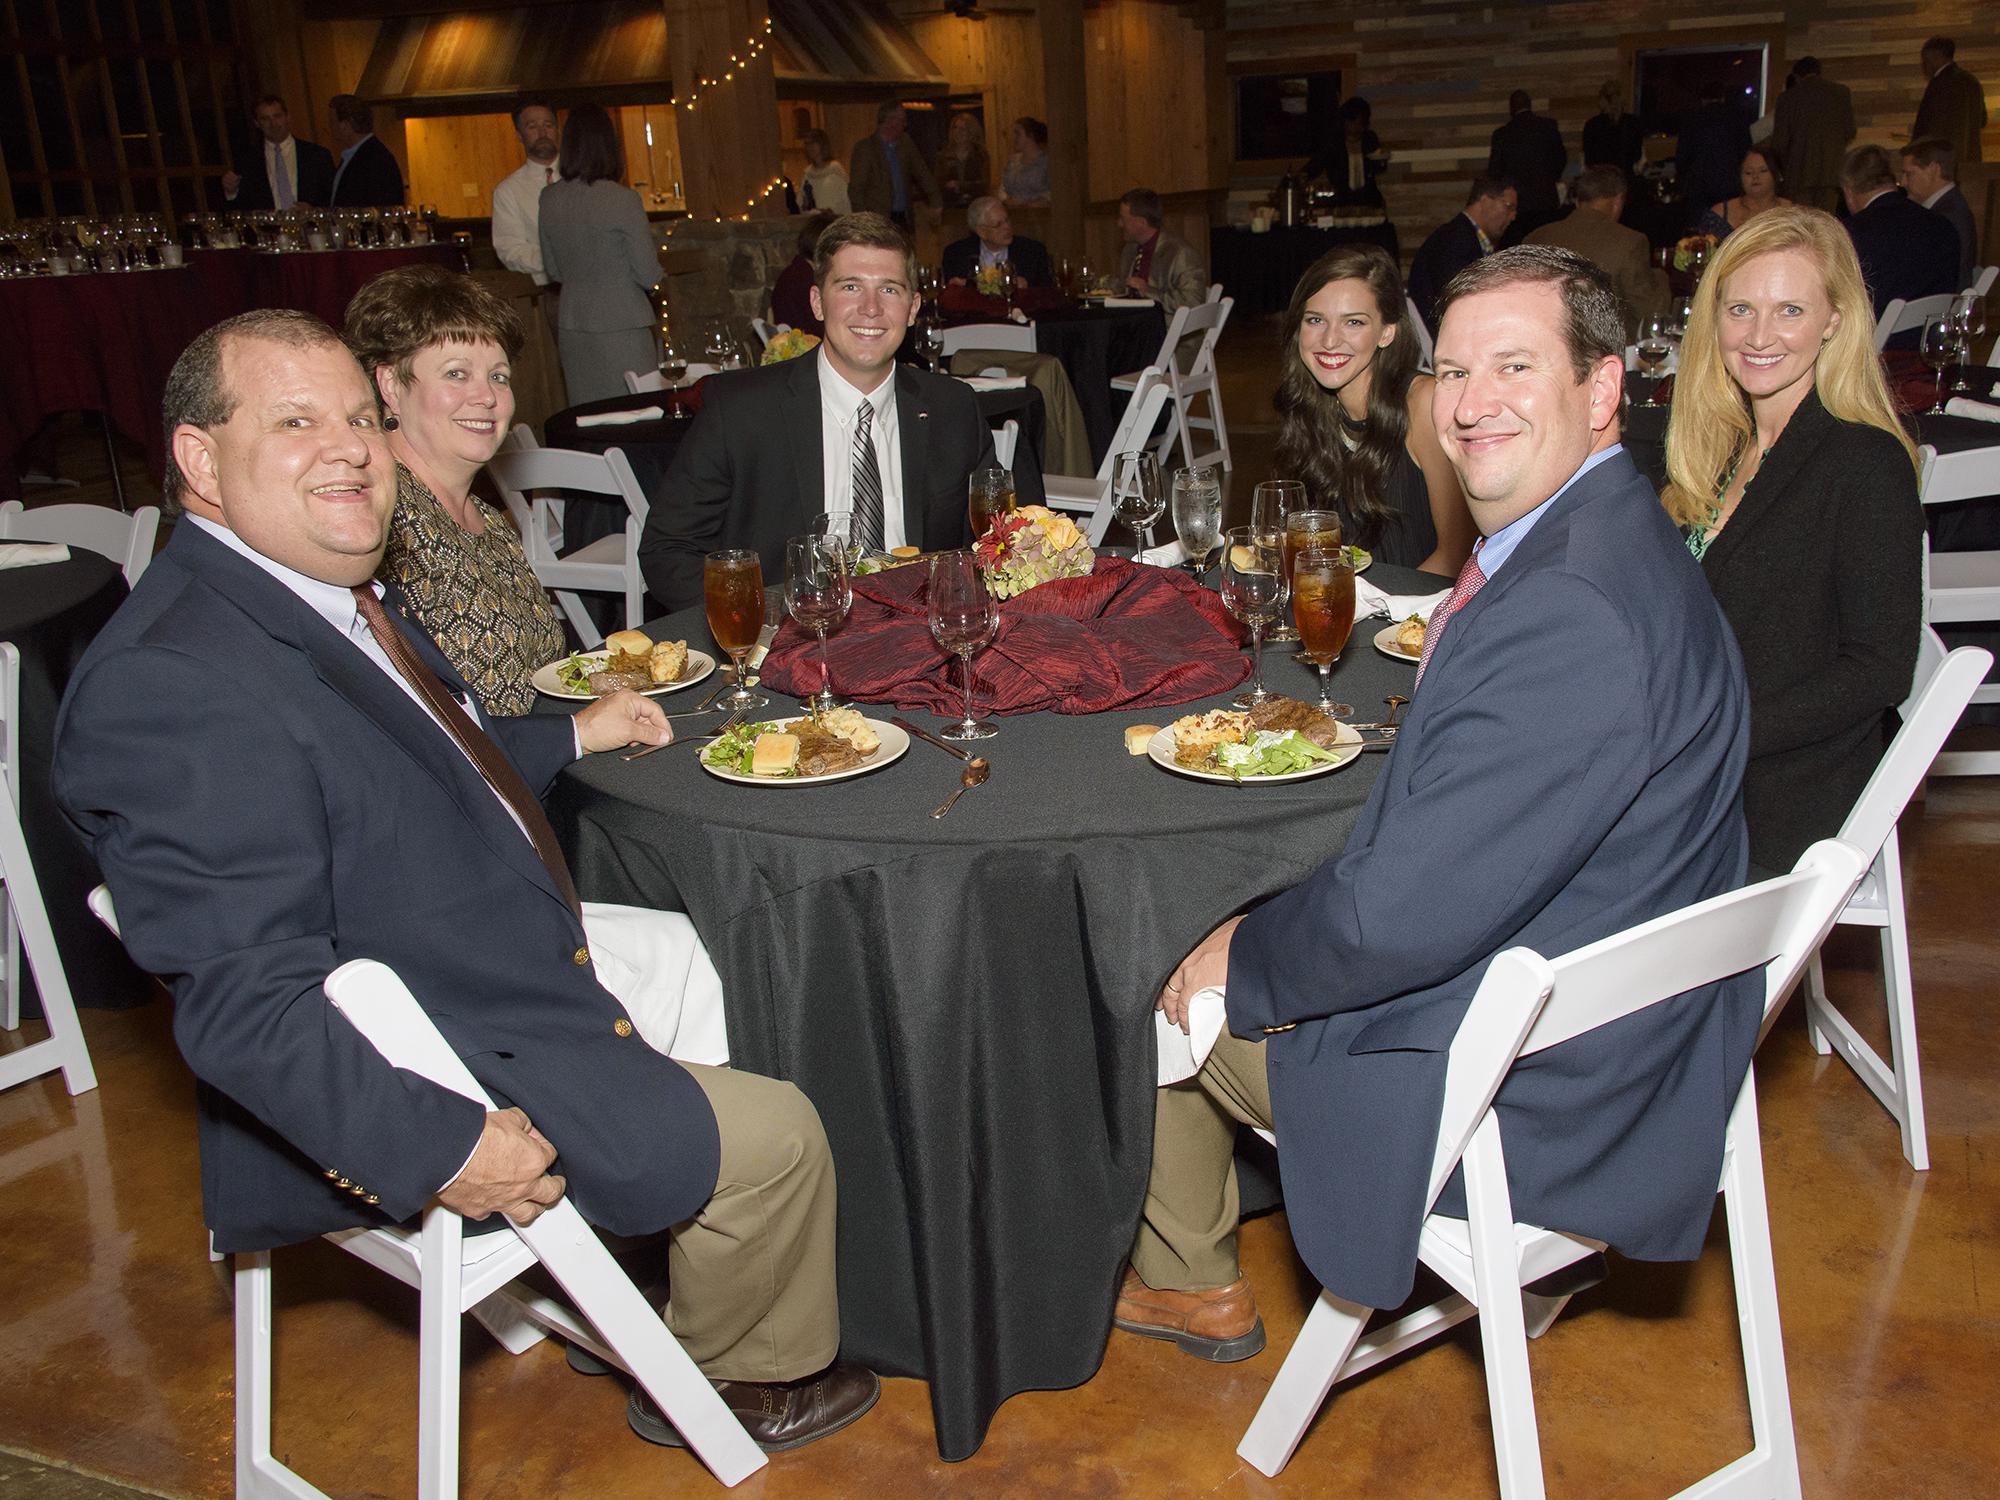 Six guests pause for a photo during a formal dinner.